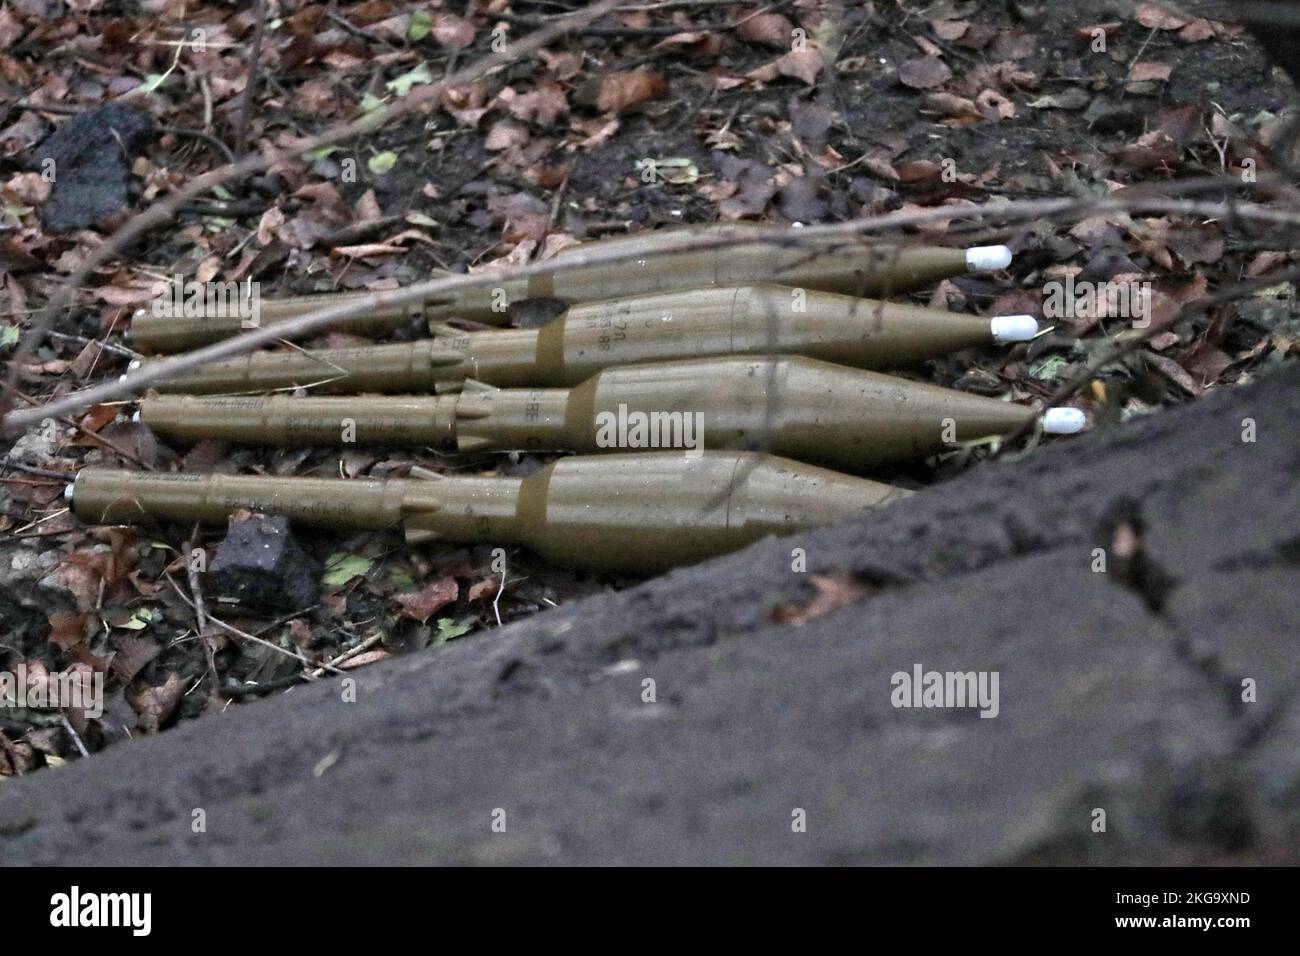 KHERSON REGION, UKRAINE - NOVEMBER 20, 2022 - Ammunition for grenade launchers is seen near the village of Pravdino liberated from the Russian occupiers by the Ukrainian defenders, Kherson Region, southern Ukraine. Stock Photo